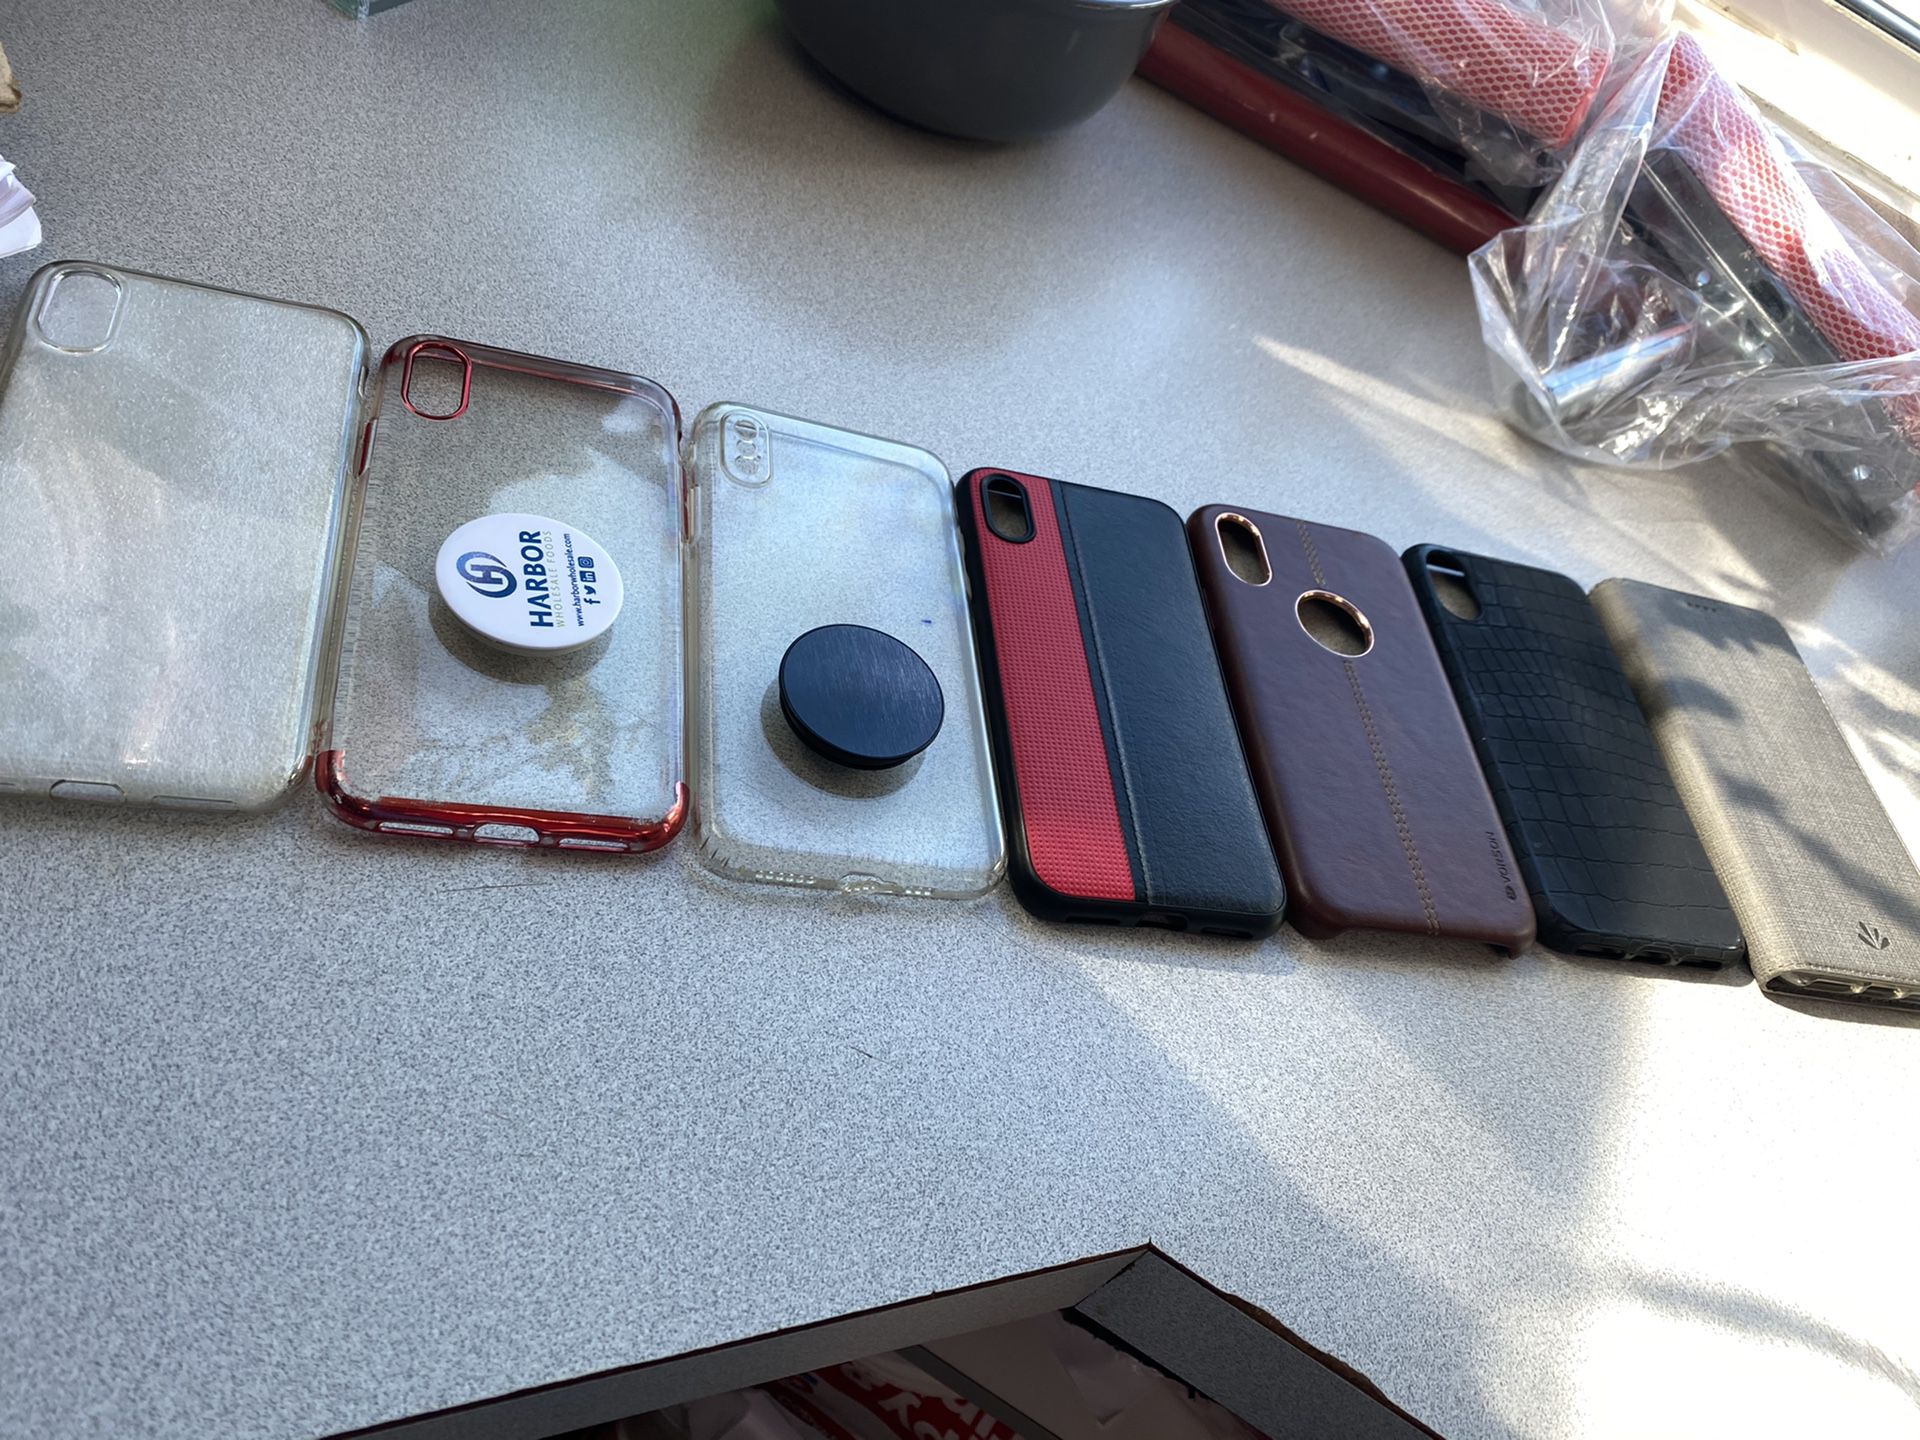 iPhone X cases and XR